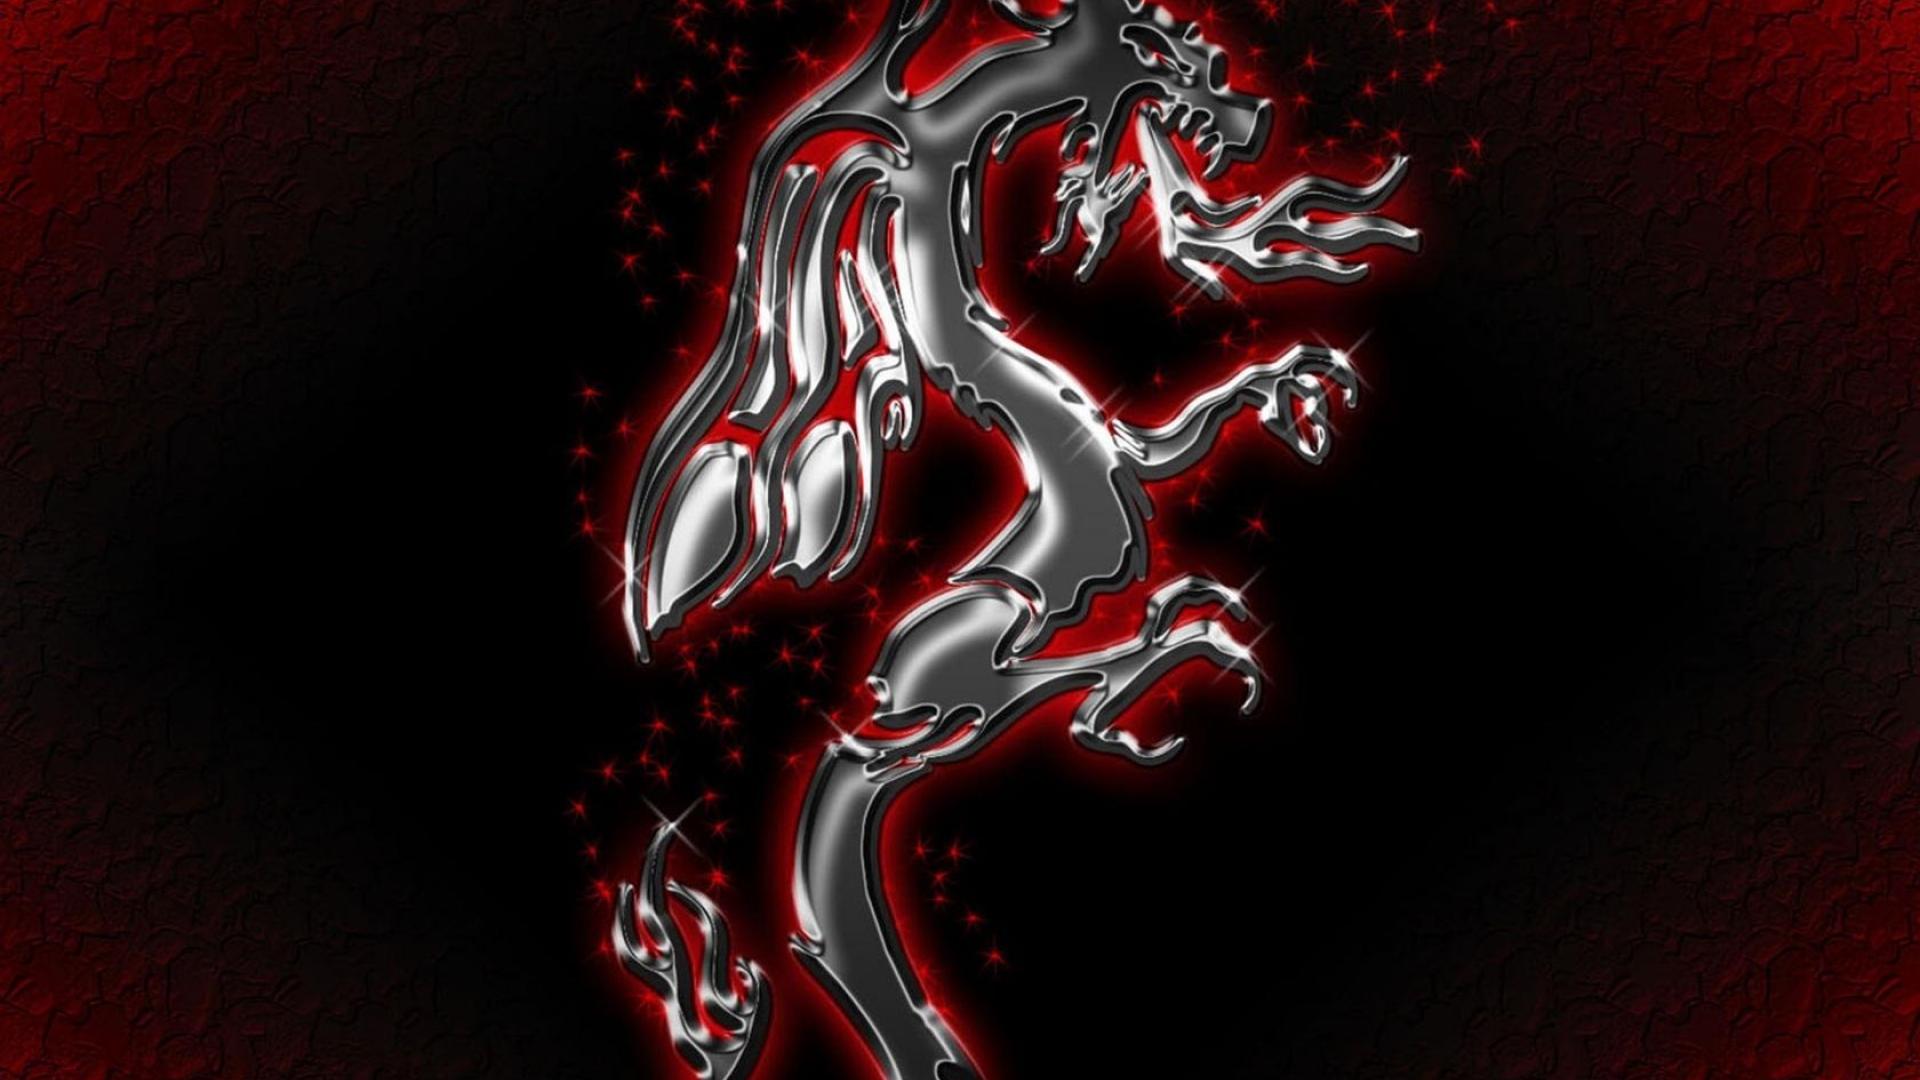 Red And Black Dragon Wallpaper Creative